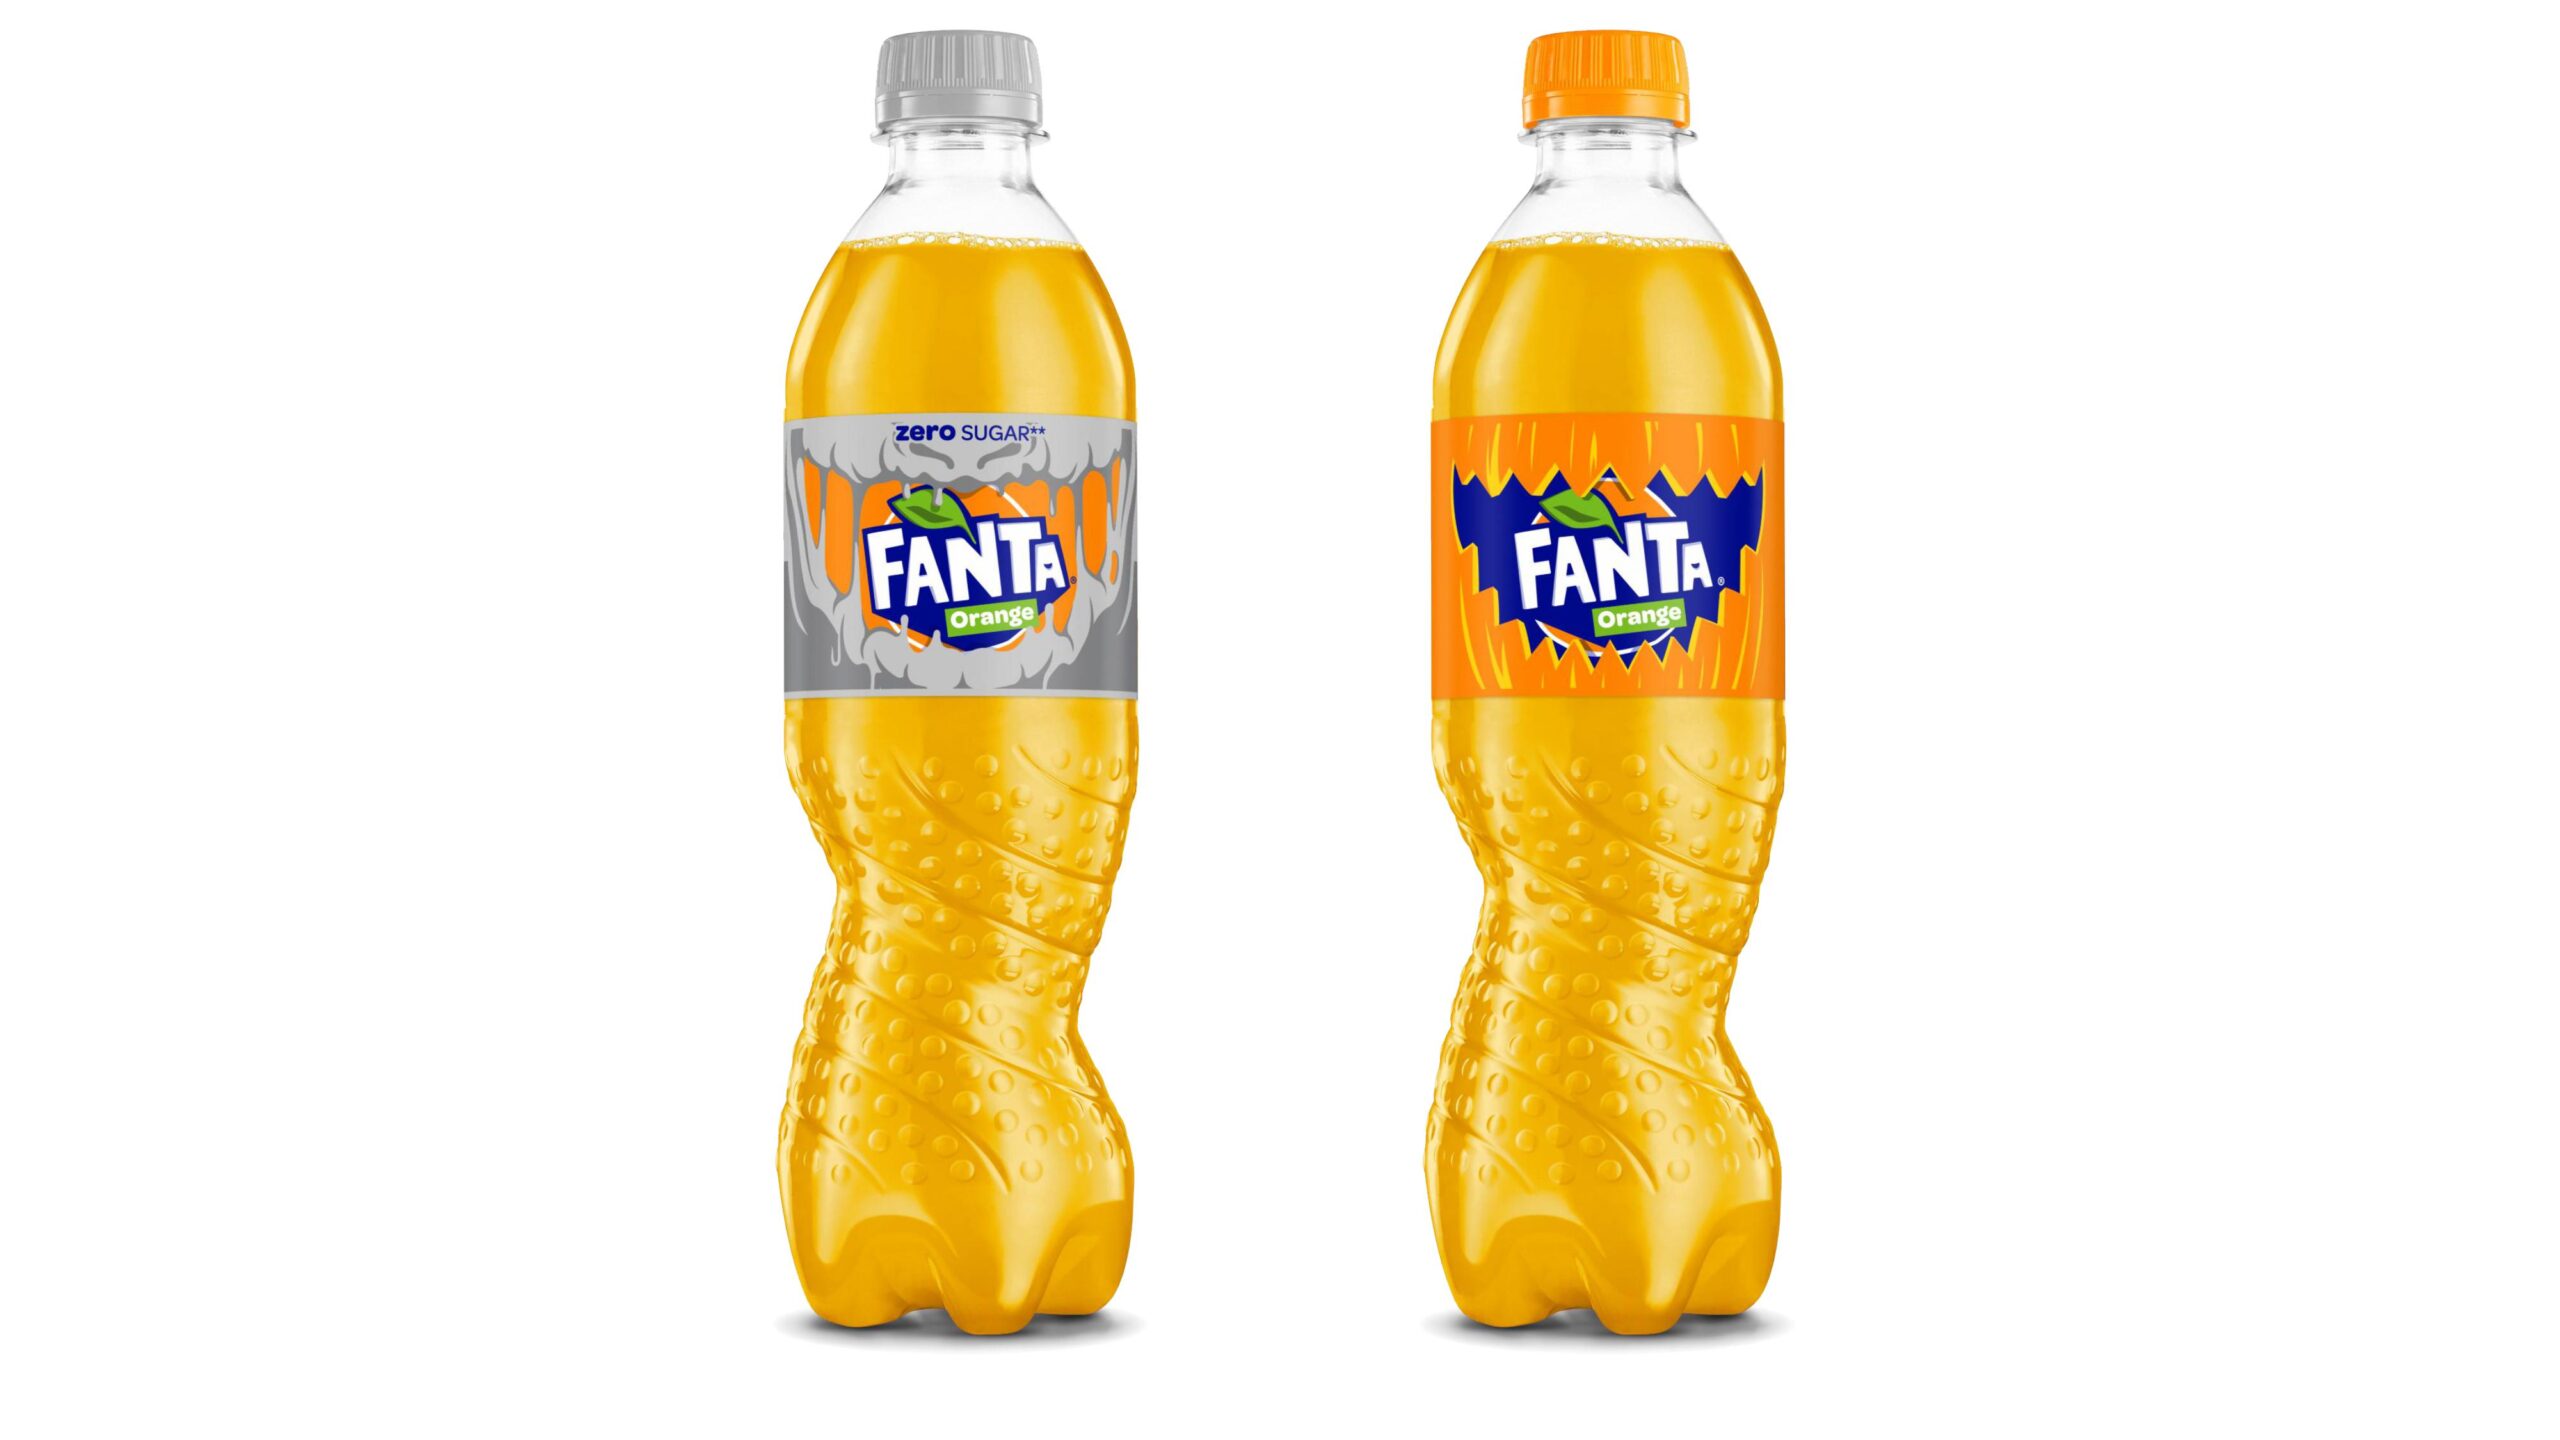 Fanta returns with limited-edition Halloween packs and promotion